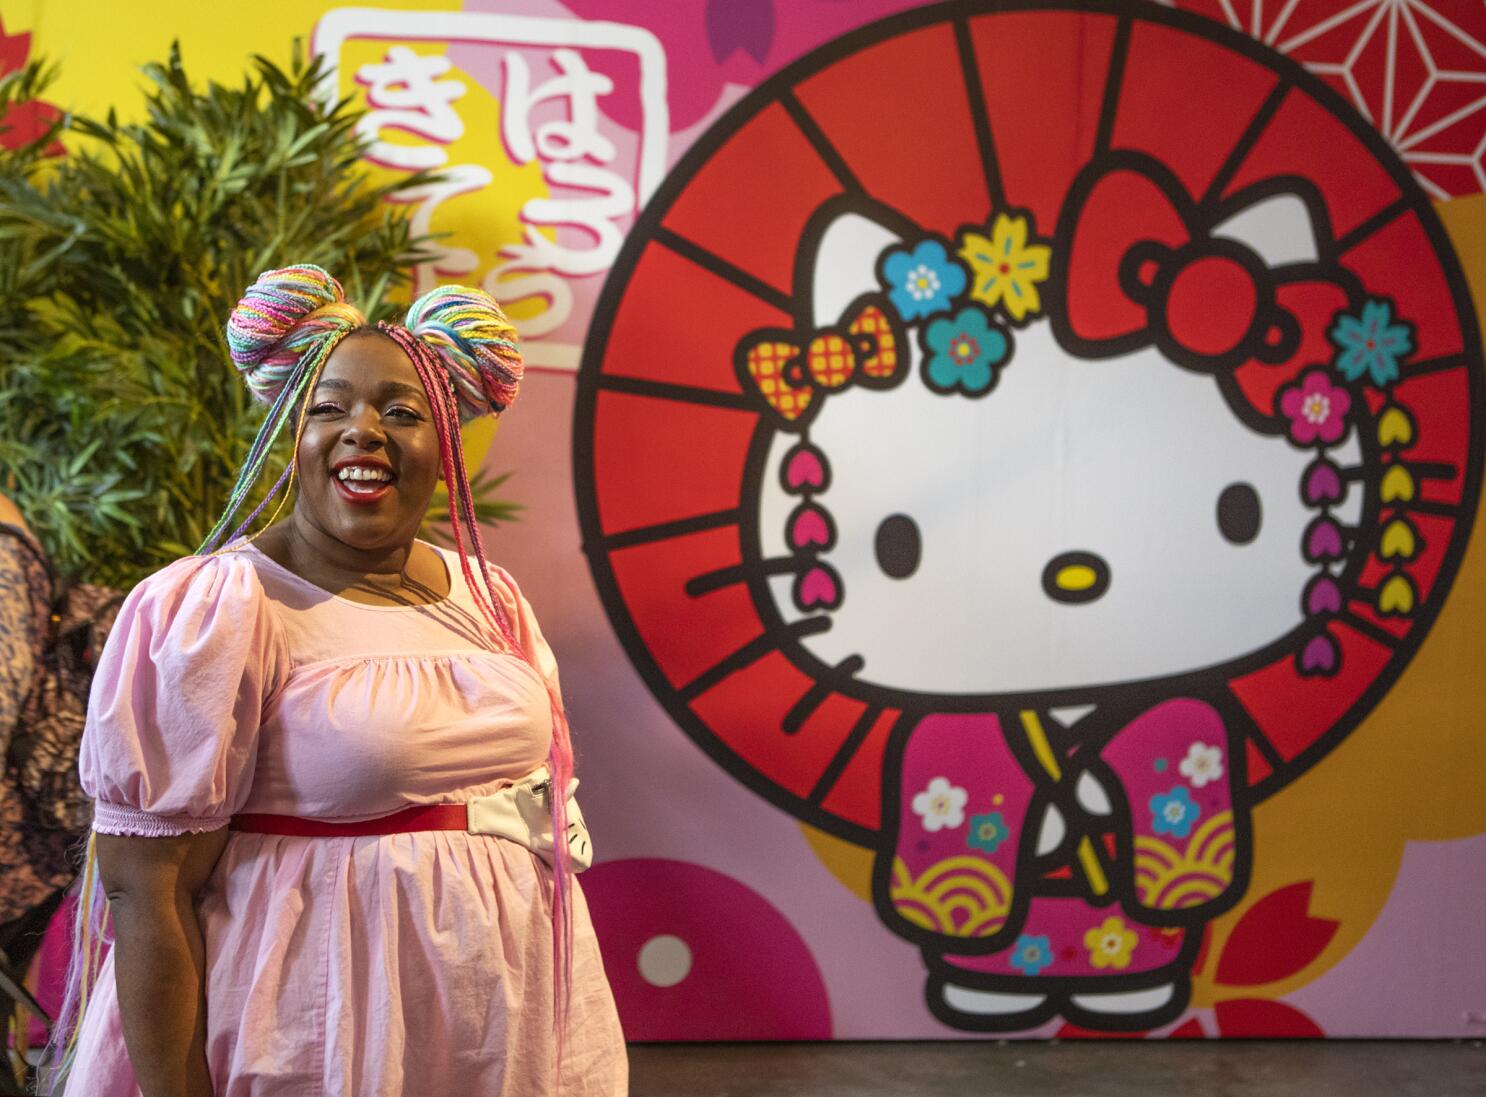 A Hello Kitty fan visits L.A. pop-up celebrating the character